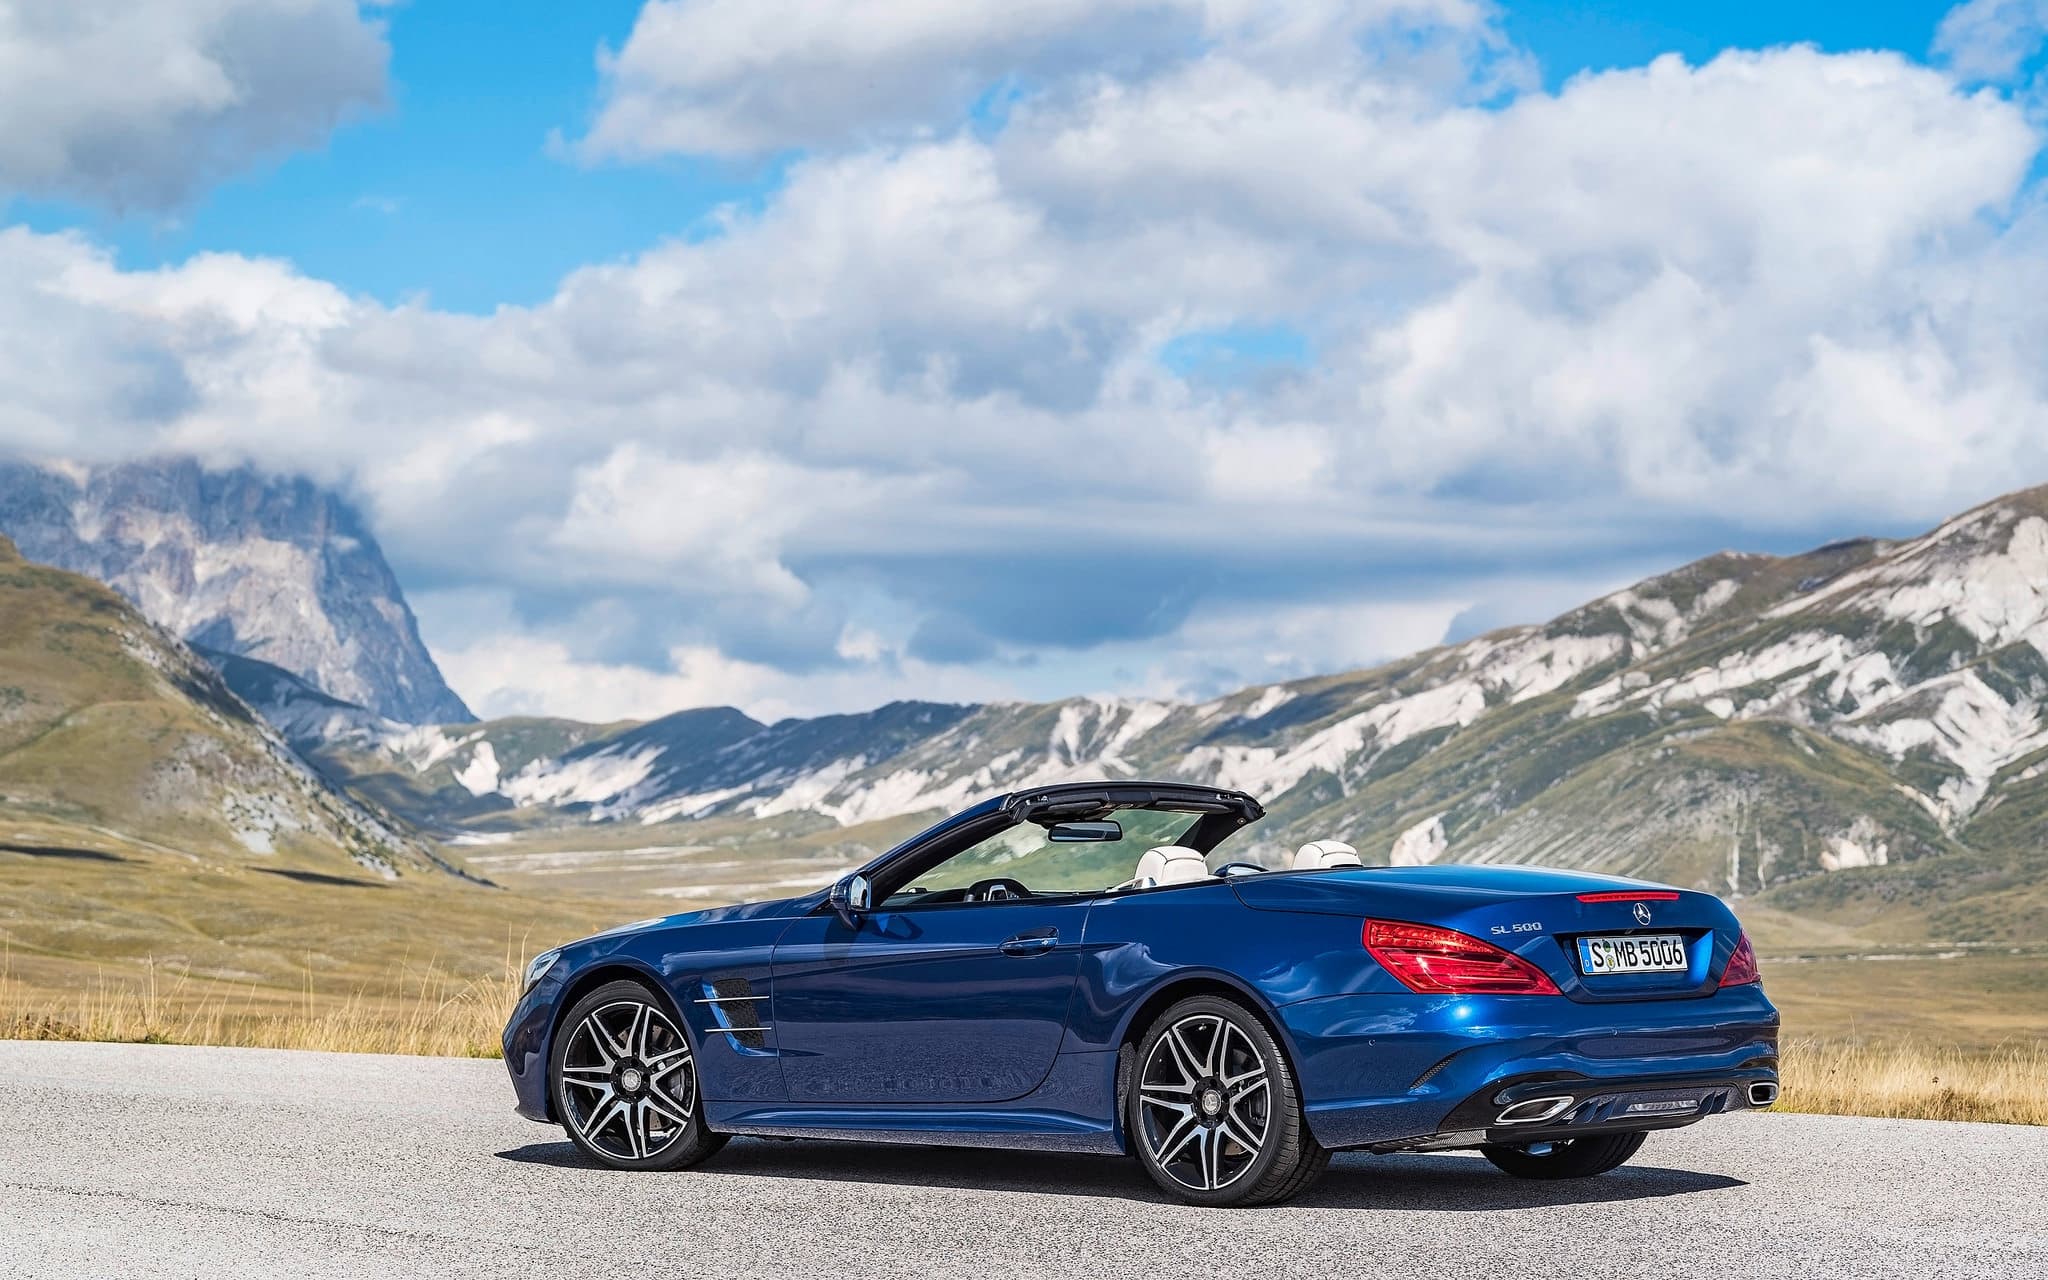 2016 Mercedes Benz SL500 wallpapers High Quality